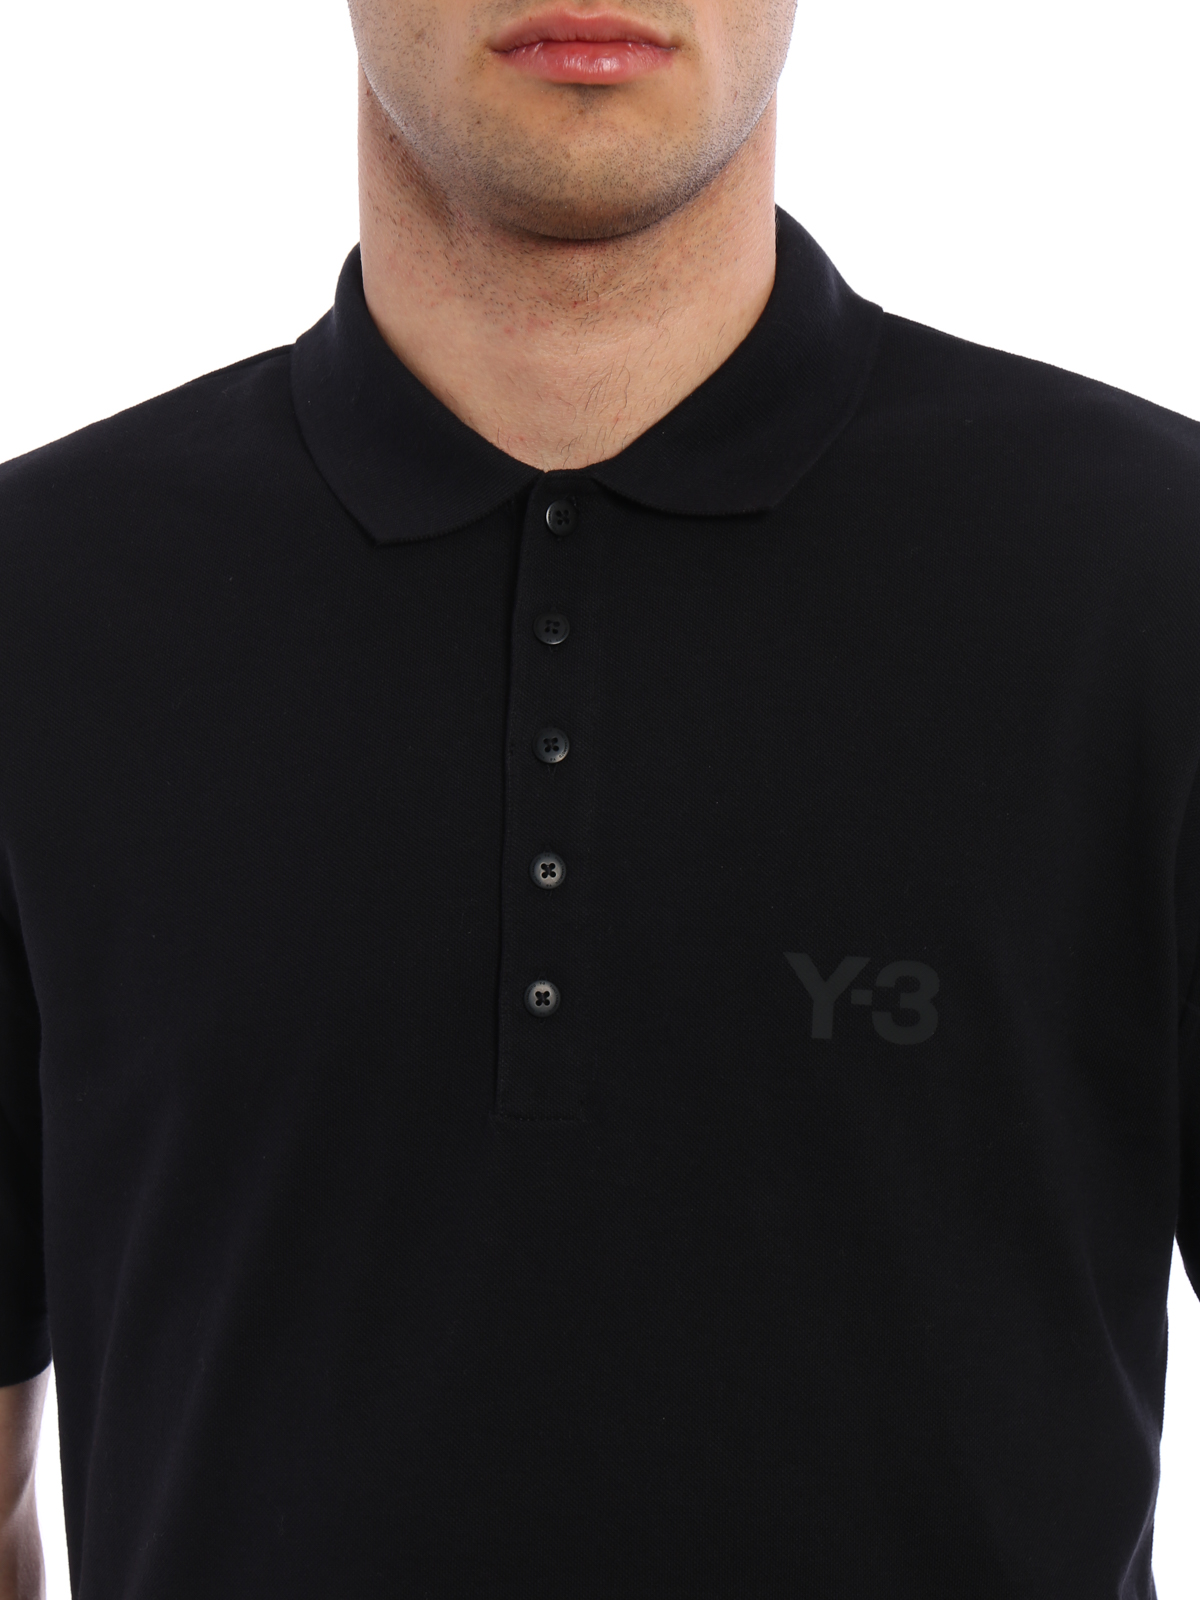 Buy y3 polo shirt sale cheap online